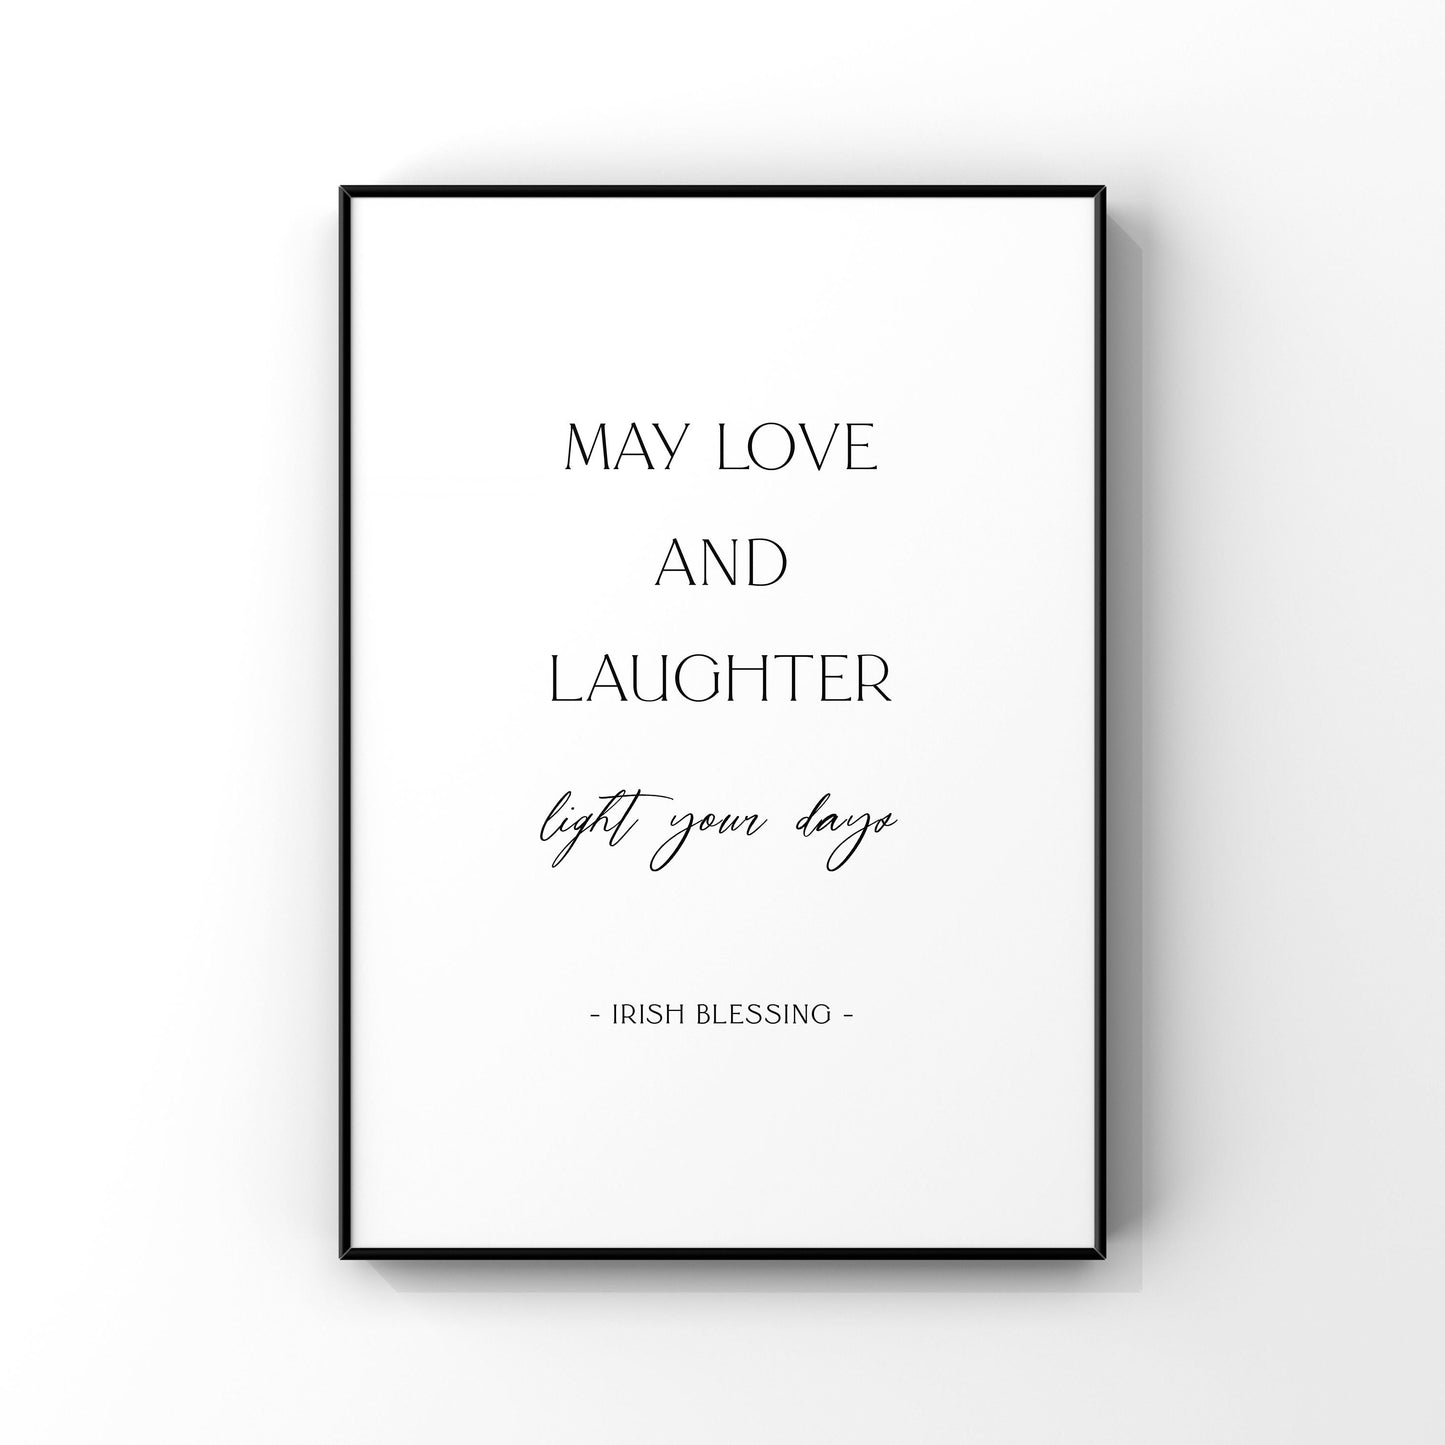 May love and laughter light your days, Irish Blessing quote print, Irish Blessing wall art, St Patricks Day decor, St Patricks Day sign